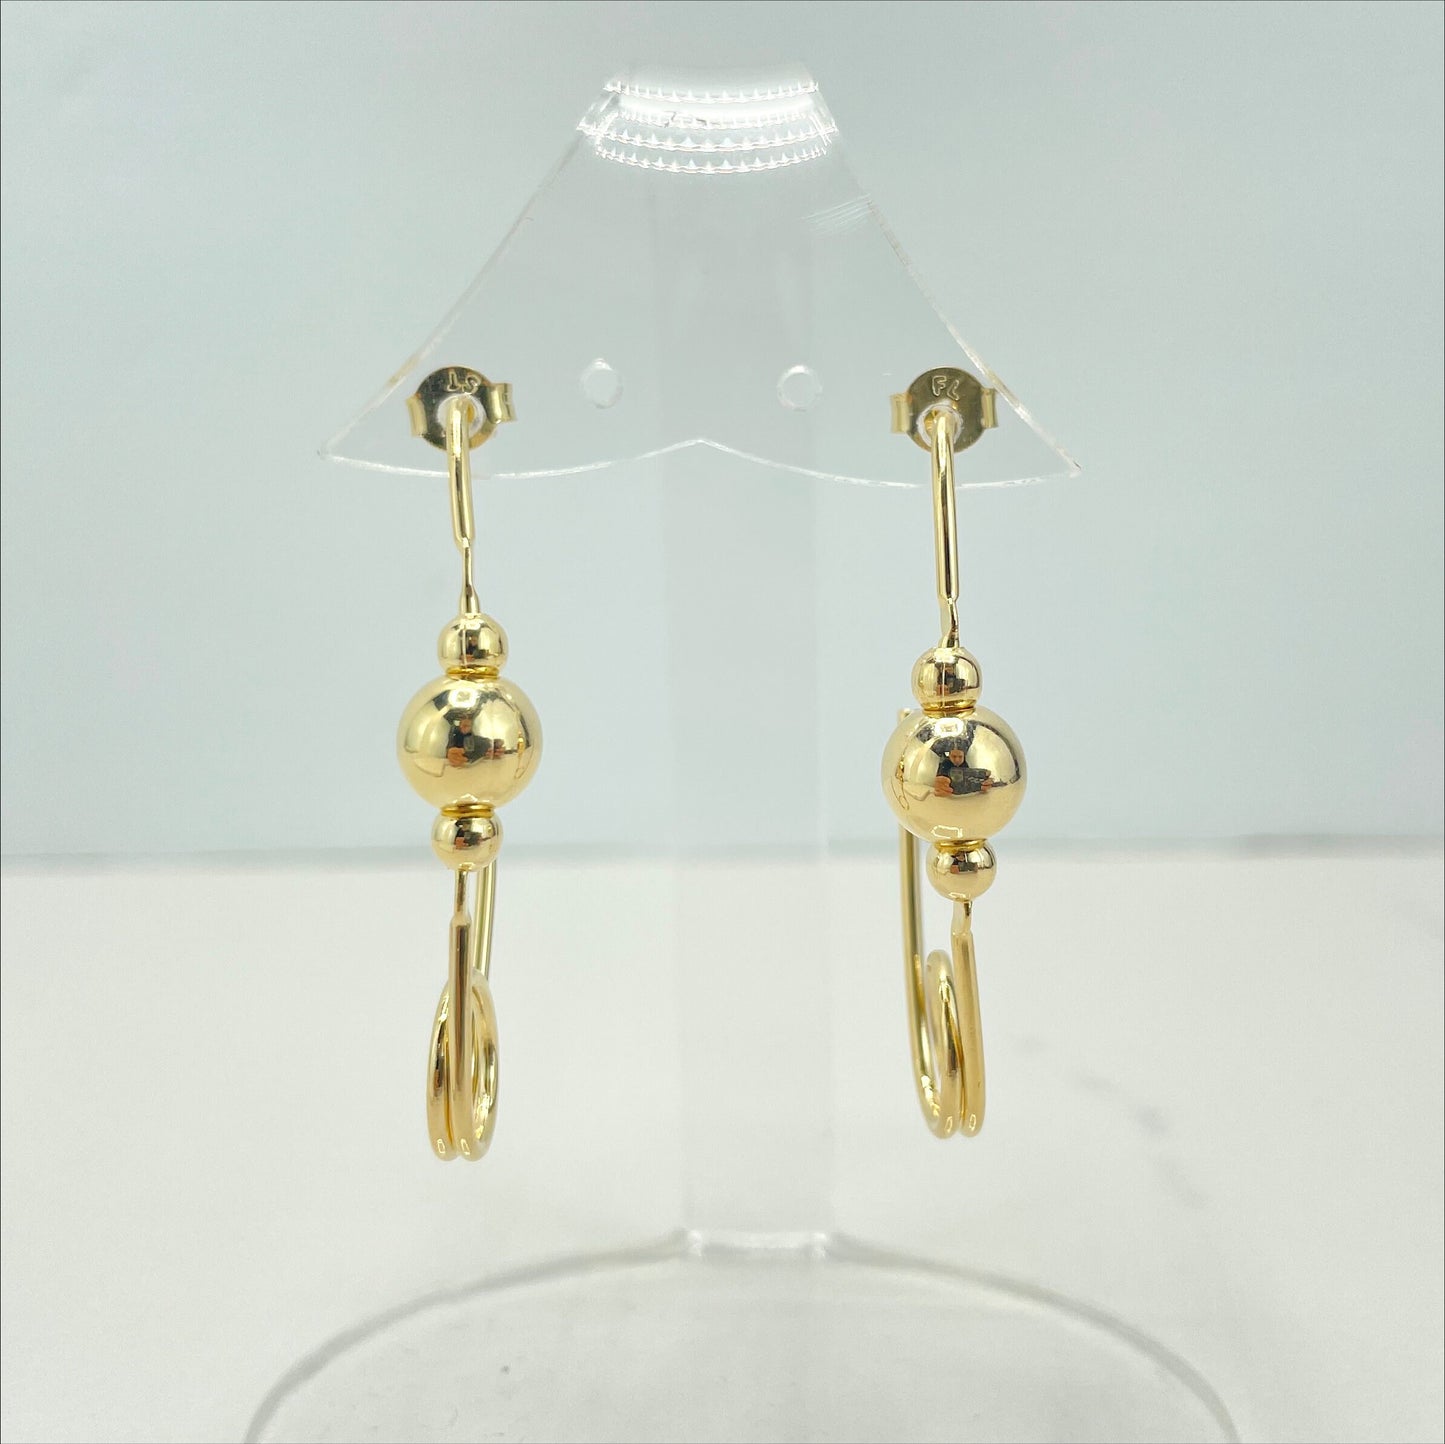 18k Gold Filled Safety Pin Design Drop Earrings With Gold Ball, Push Back Closure, Wholesale Jewelry Making Supplies